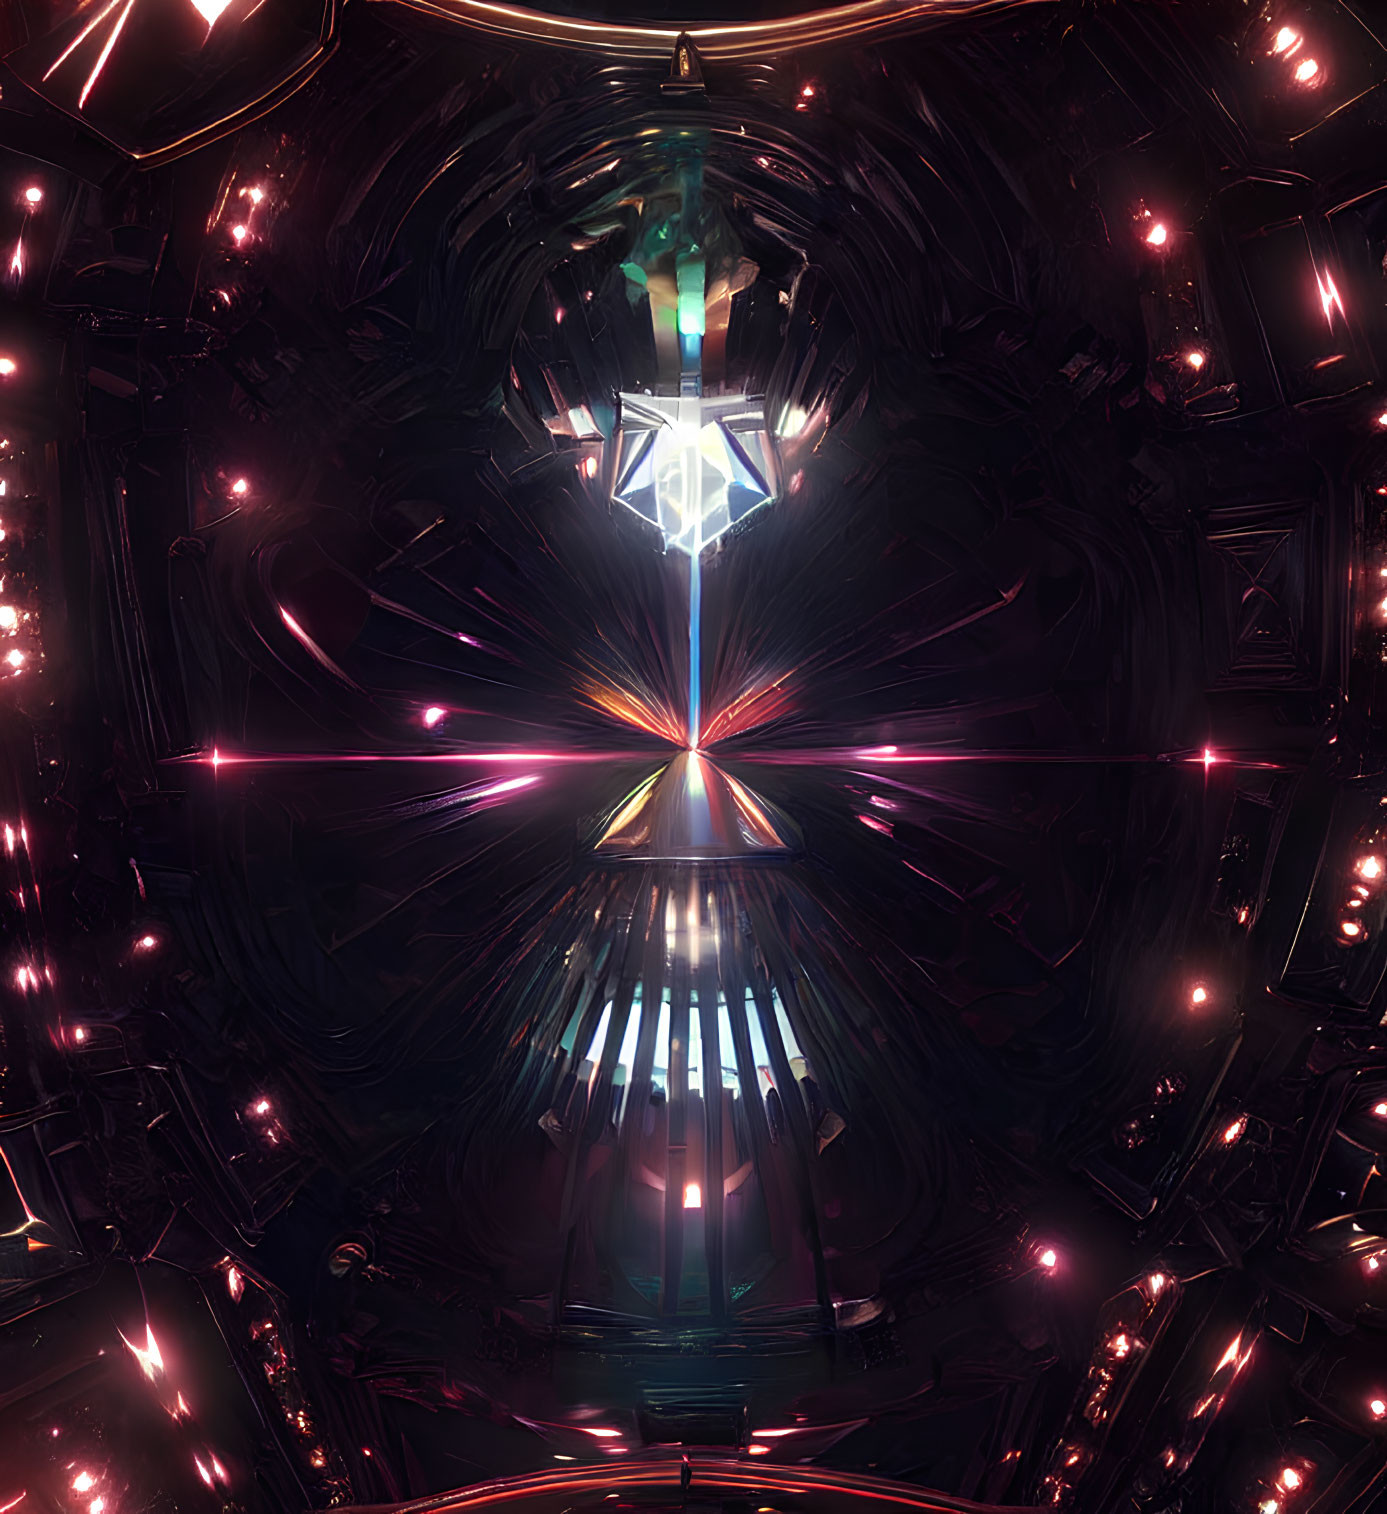 Symmetrical abstract image with glowing central figure and metallic structures